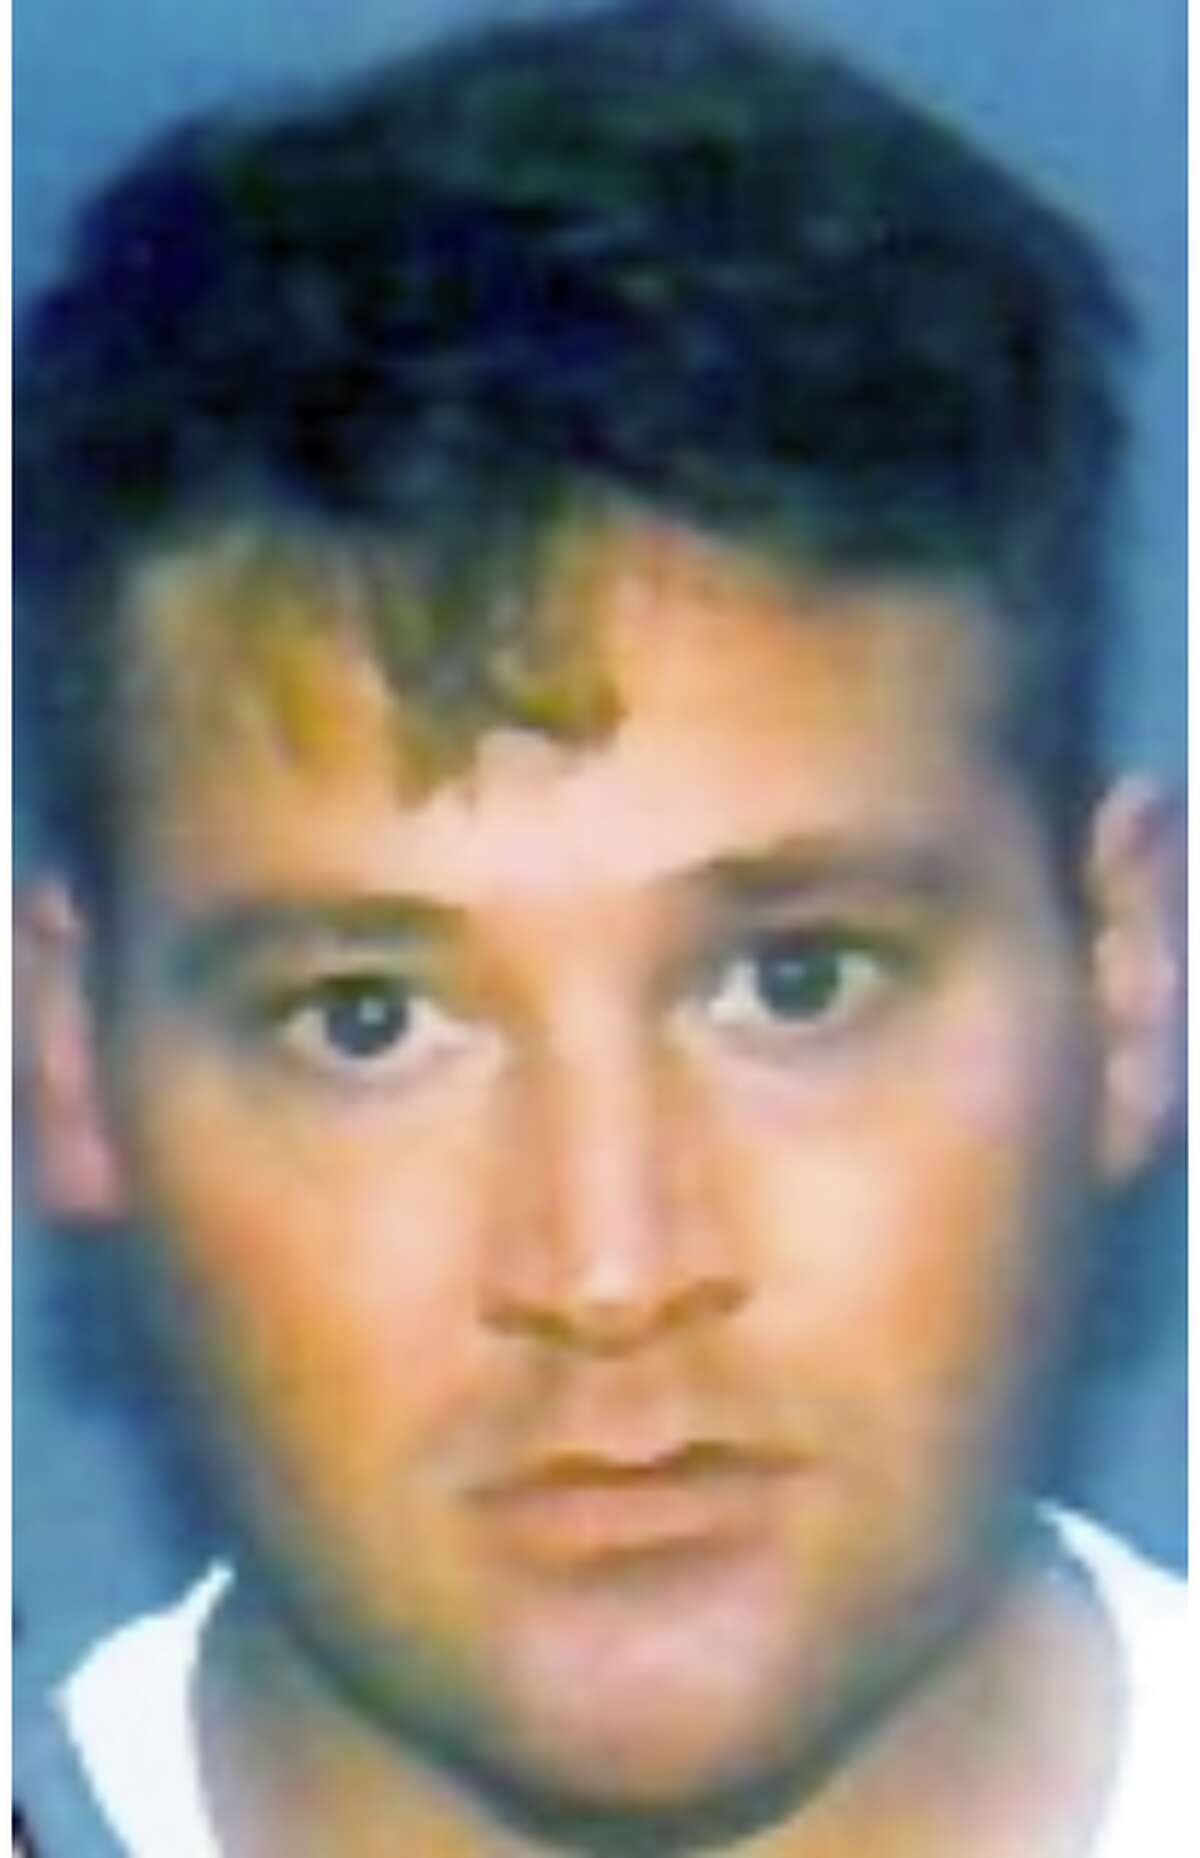 David Paul Morrison, 28, went missing on May 25, 1998, from Yosemite National Park.